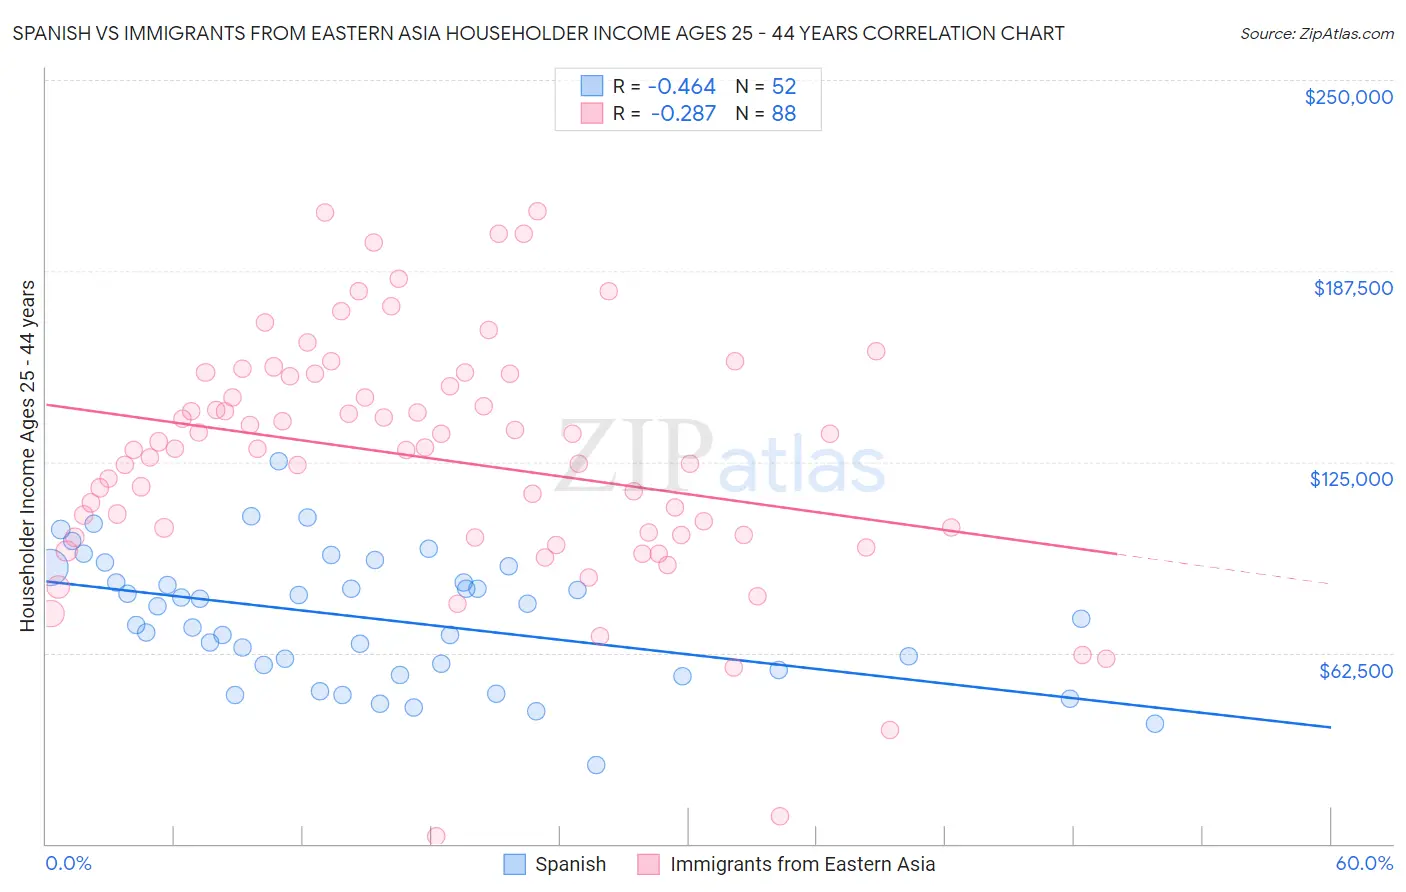 Spanish vs Immigrants from Eastern Asia Householder Income Ages 25 - 44 years